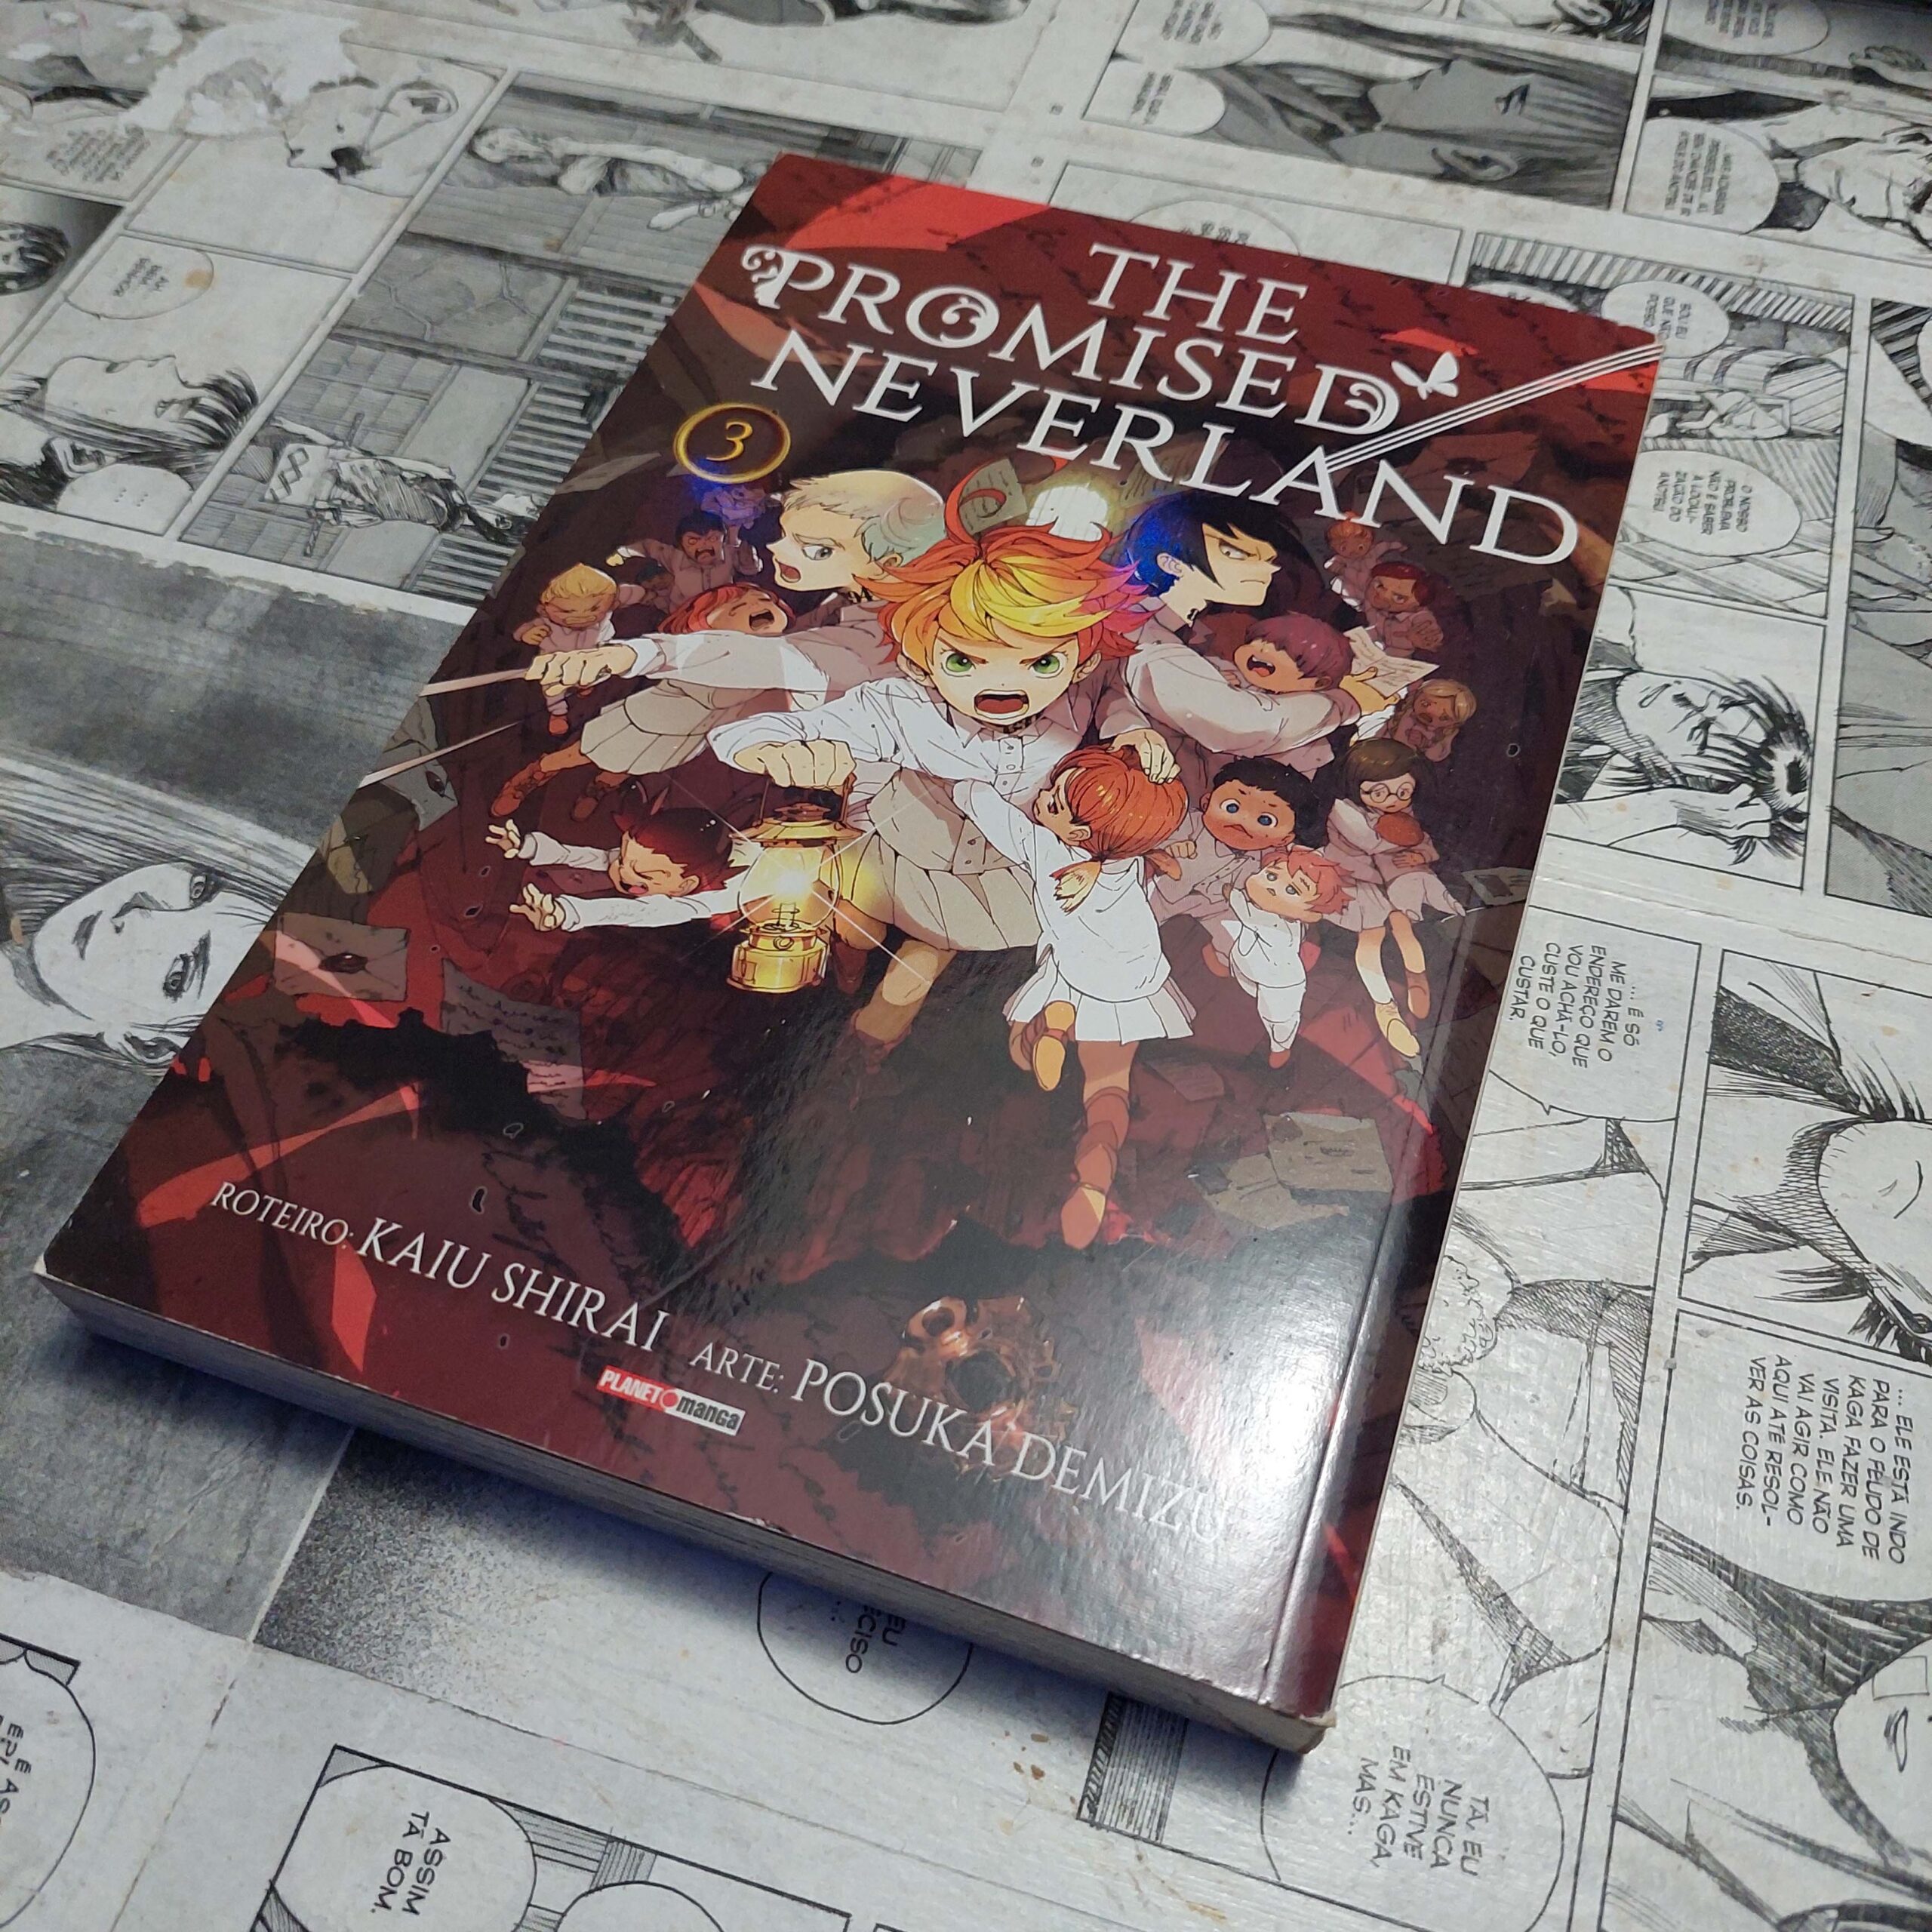 The Promised Neverland, Vol. 3 (3)